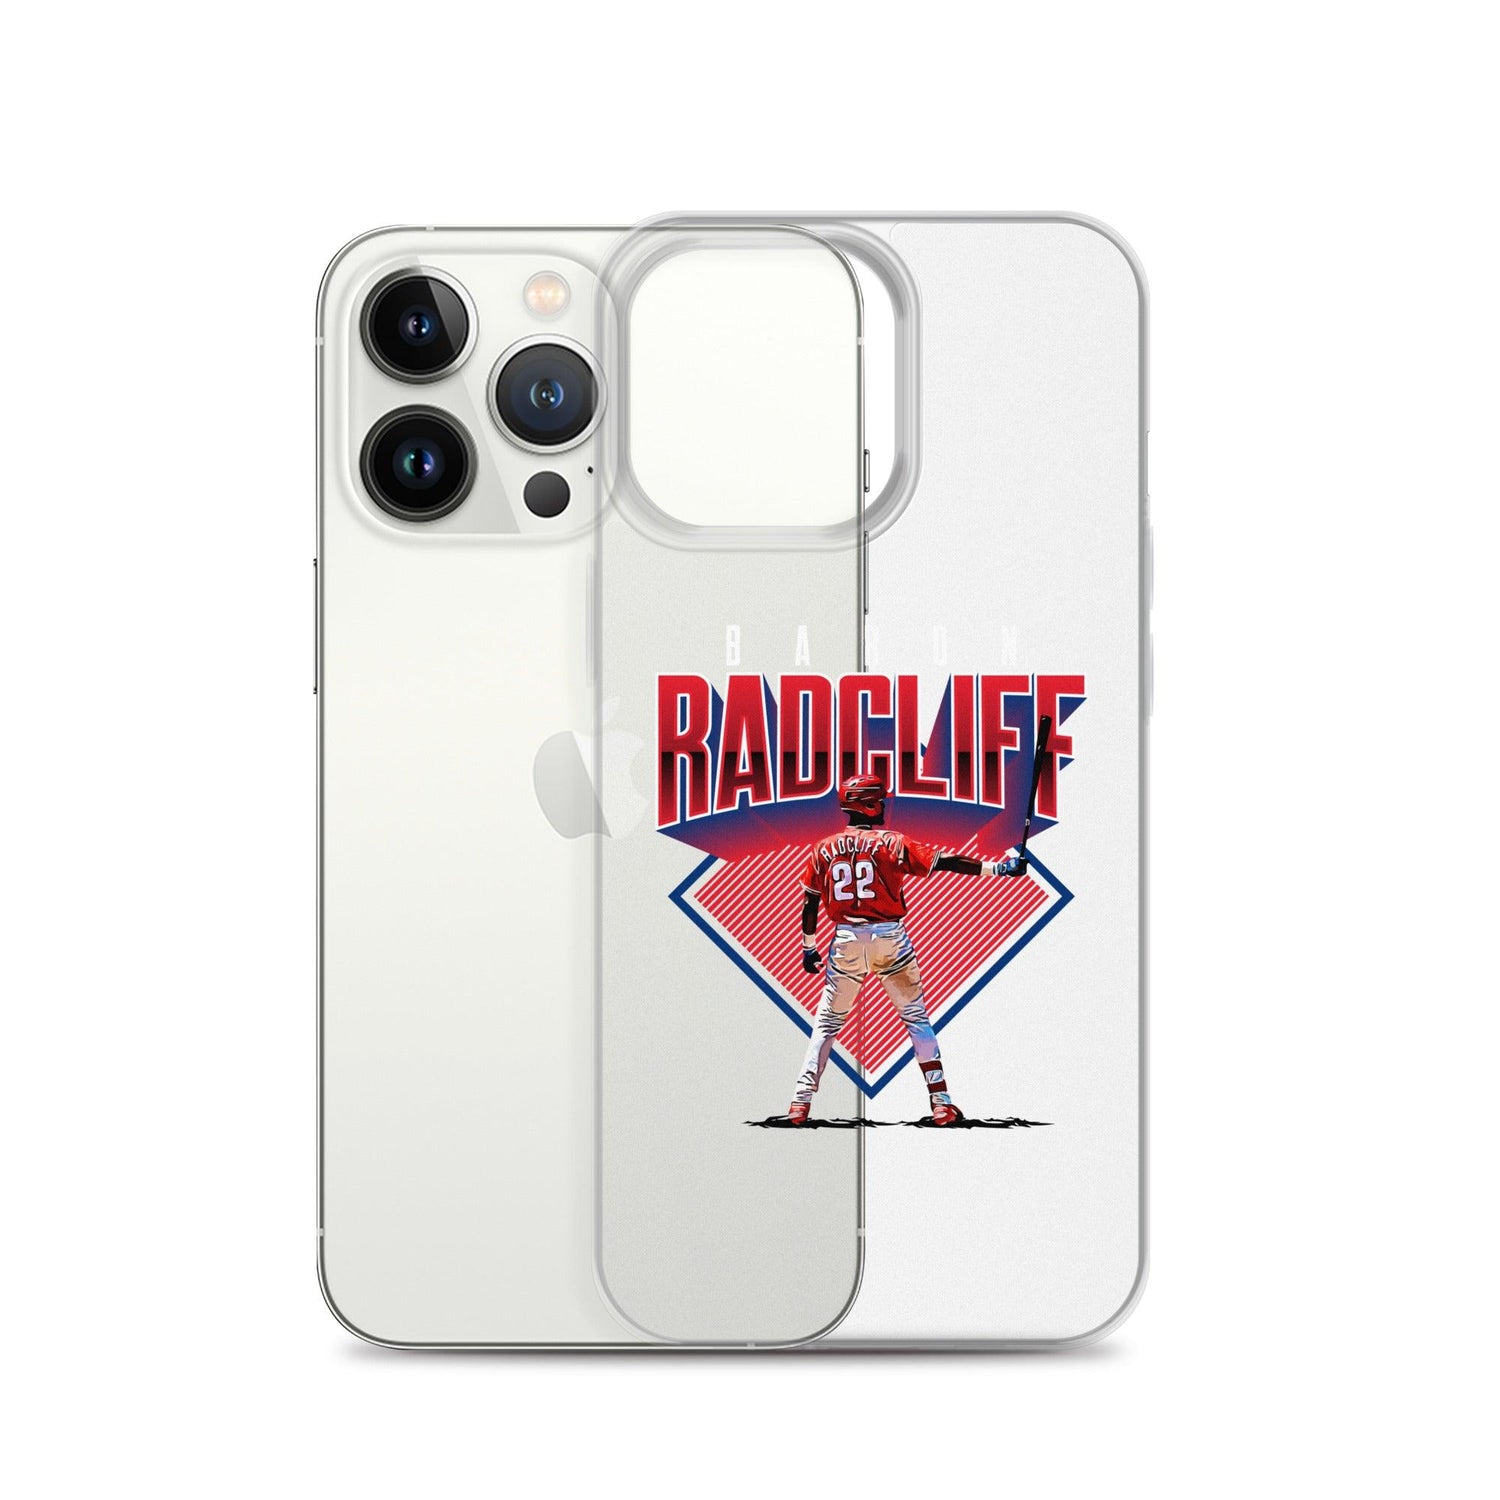 Baron Radcliff "Gameday" iPhone Case - Fan Arch